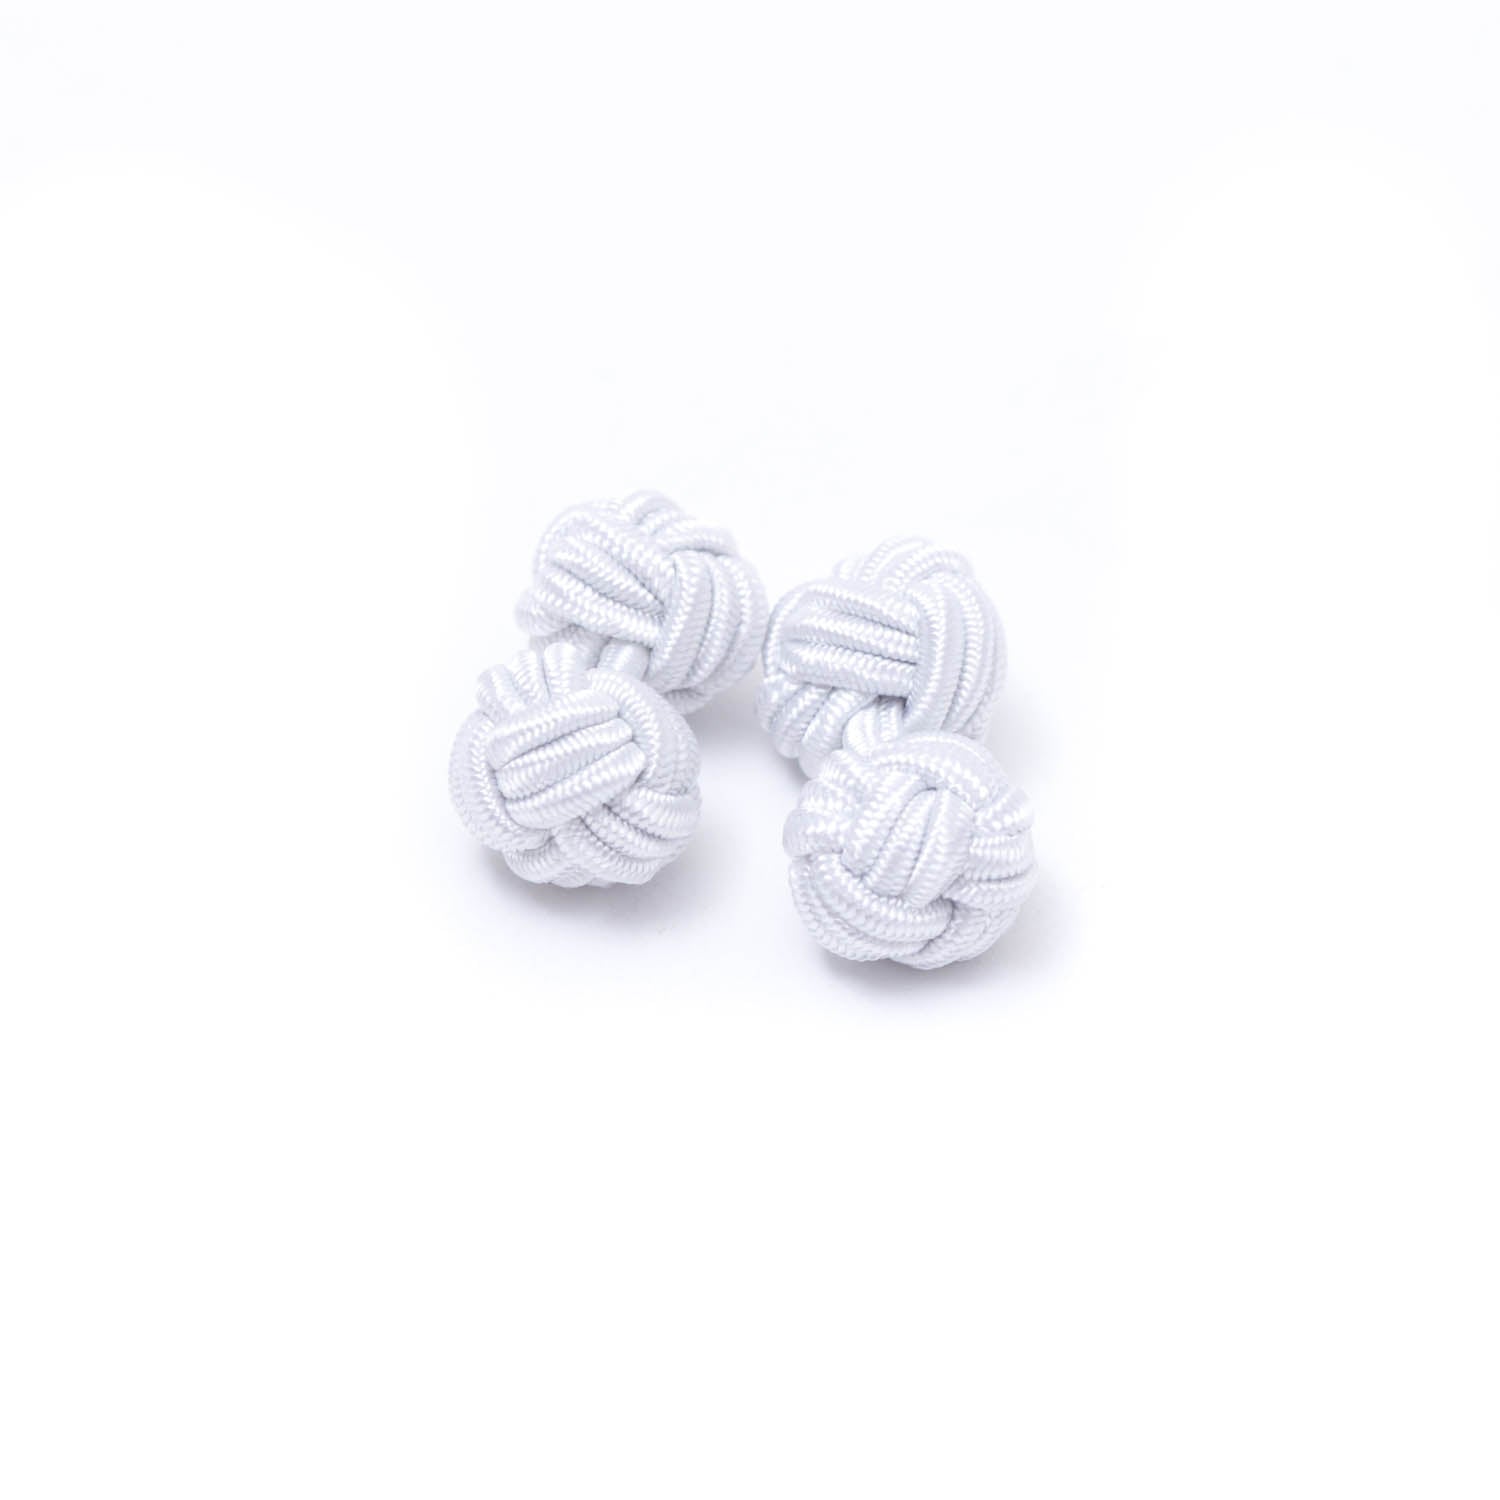 Two Solid Knot Cuff Links by KirbyAllison.com on a white surface.